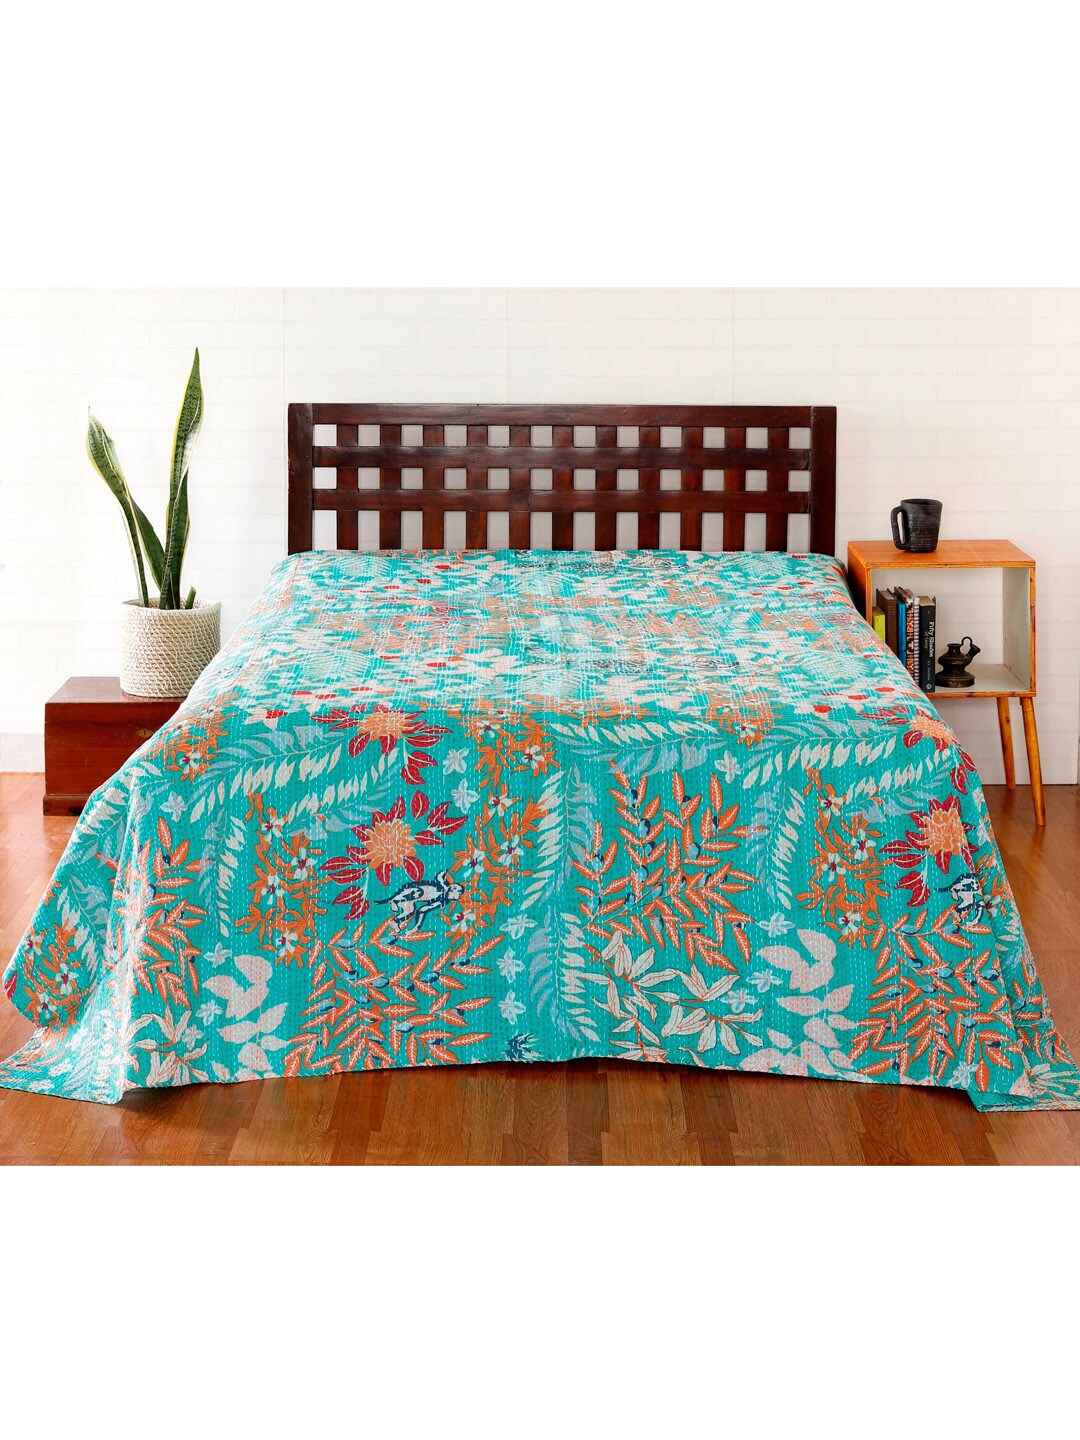 HANDICRAFT PALACE Green Kantha Embroidered Cotton Double Queen Bed Cover Price in India